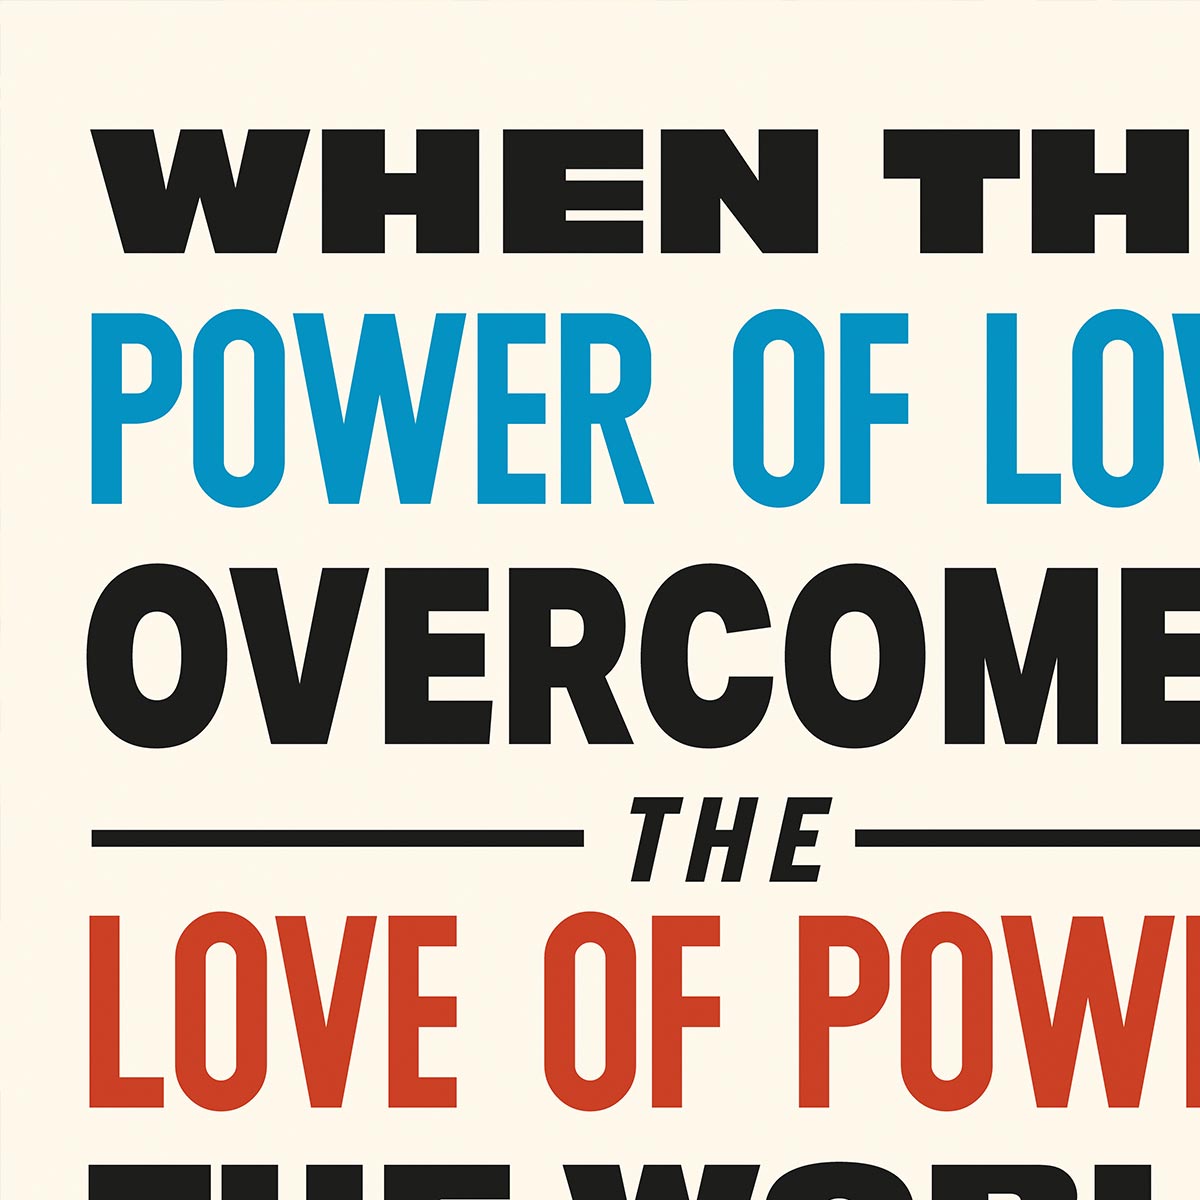 The Power of Love Art Poster.